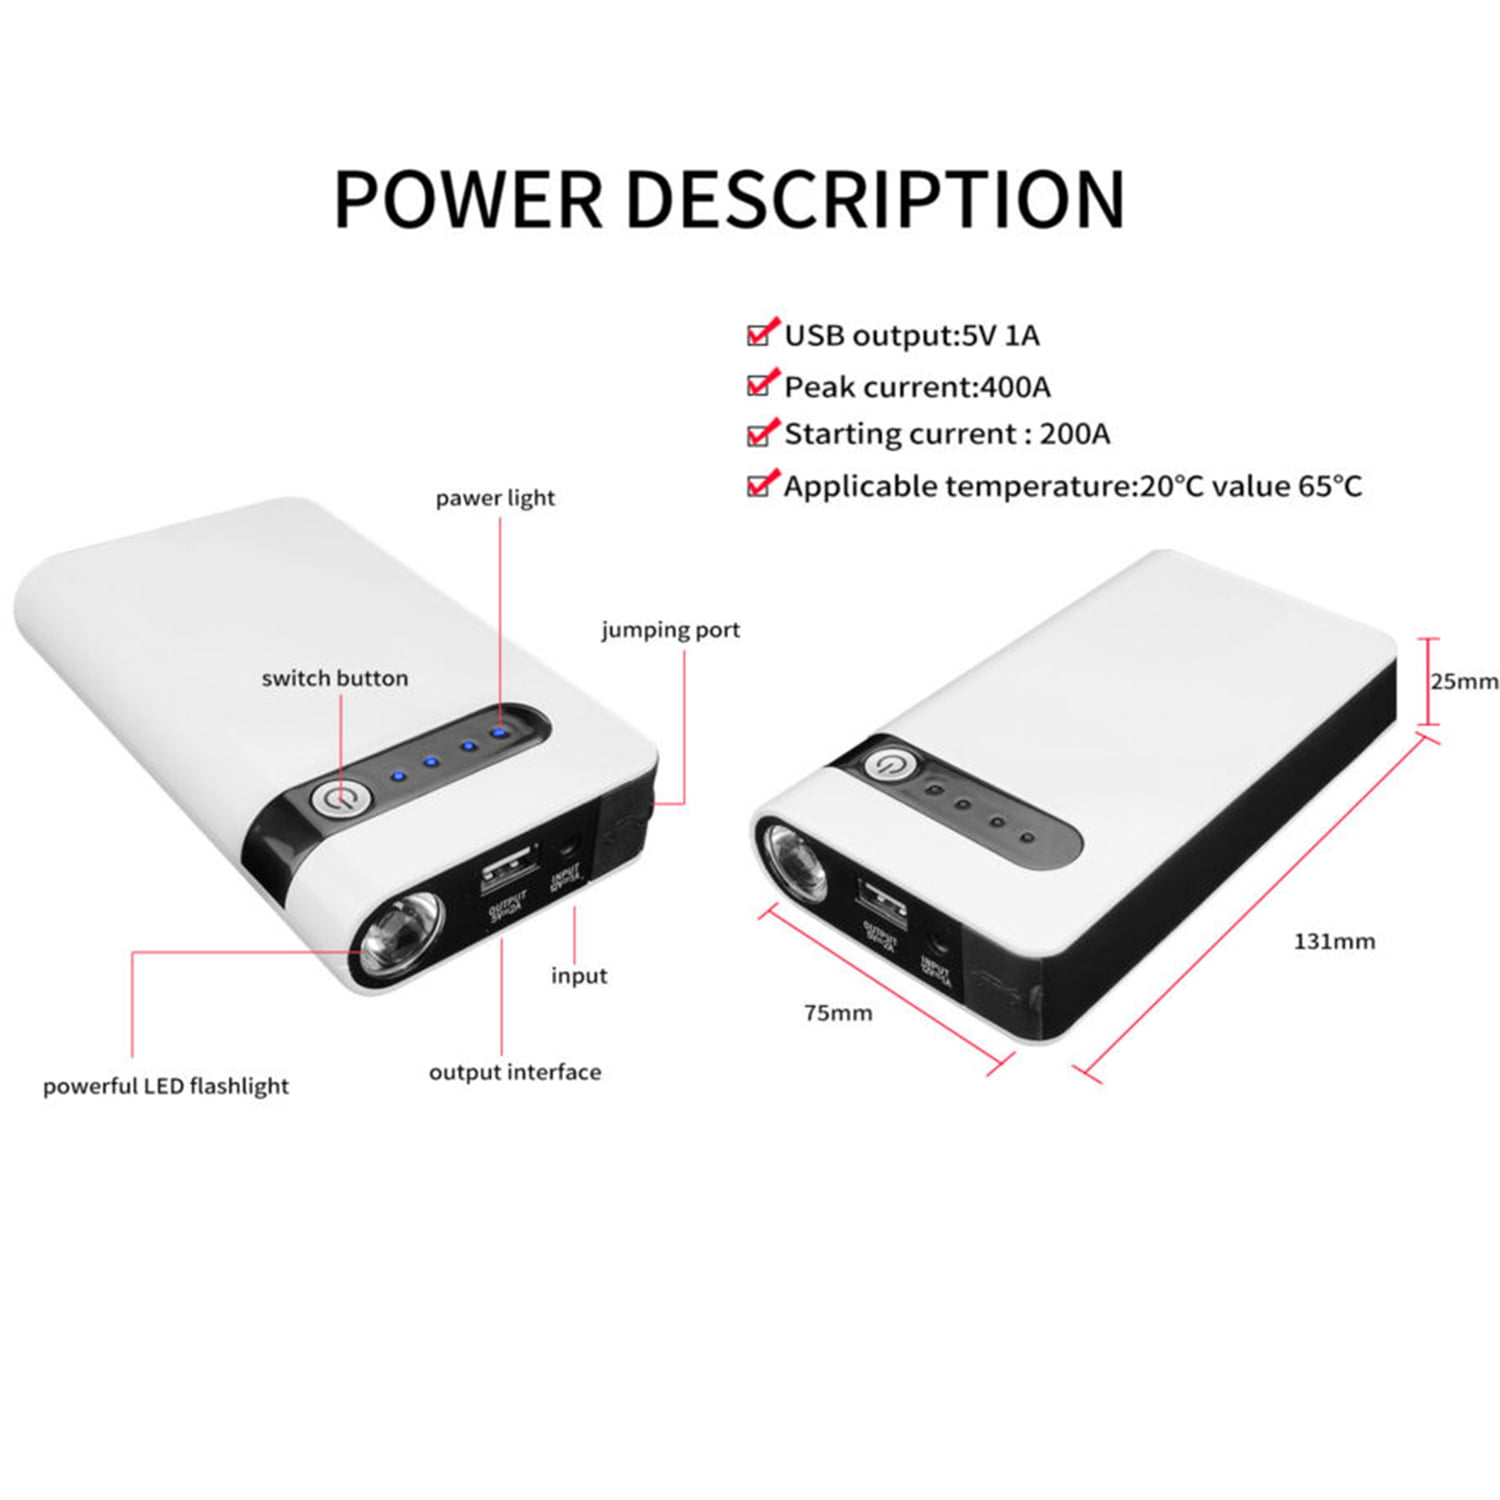 Xhy 89800mAh Car Jump Starter Portable Battery Pack Booster Jumper Box  Emergency Start Power Bank Supply Charger with Built-in LED Light